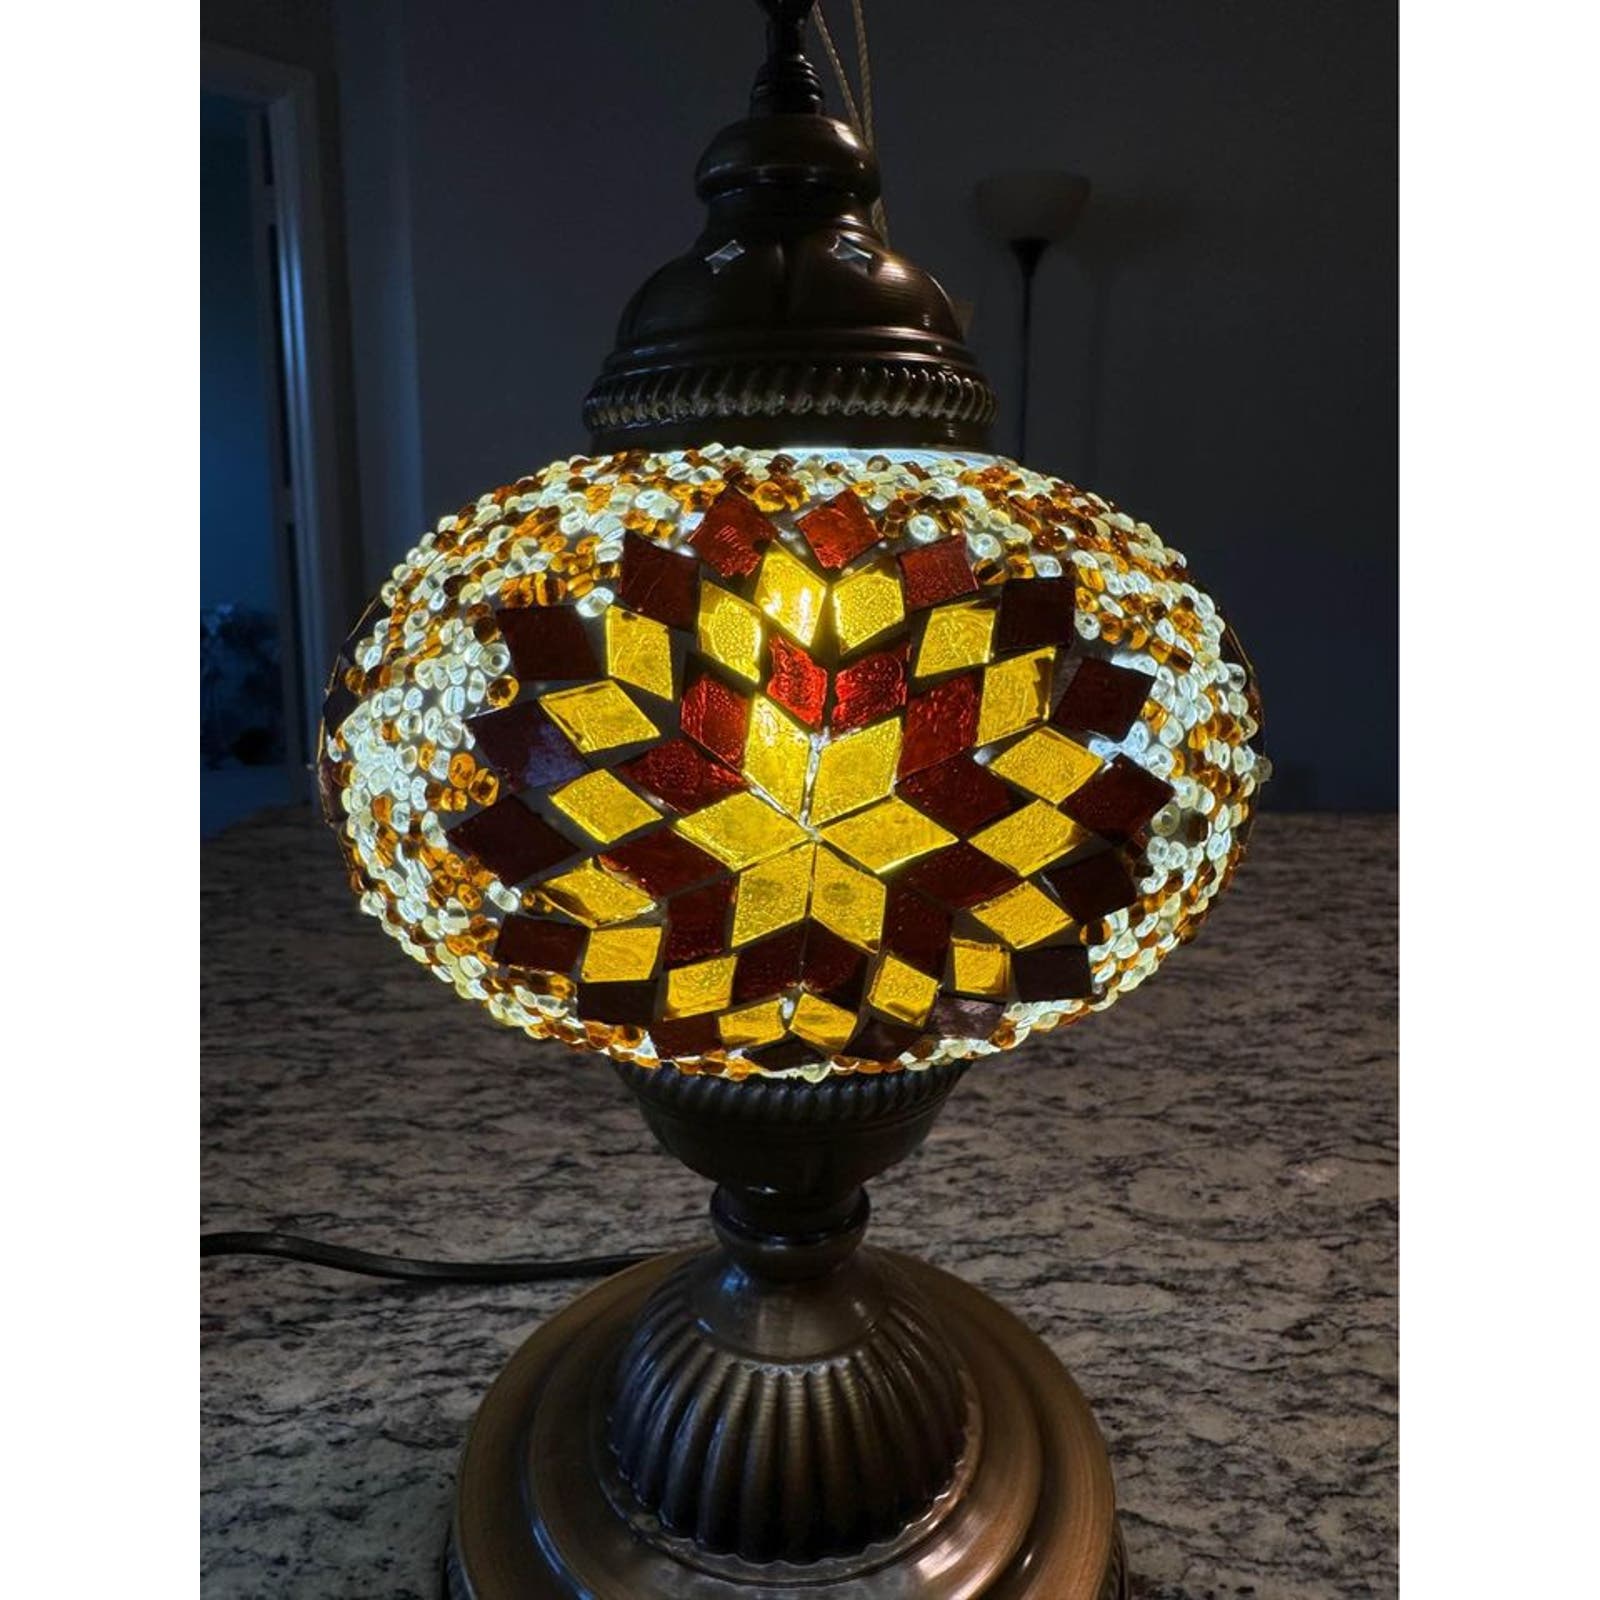 Moroccan mosaic lamp collection, various sizes and colors